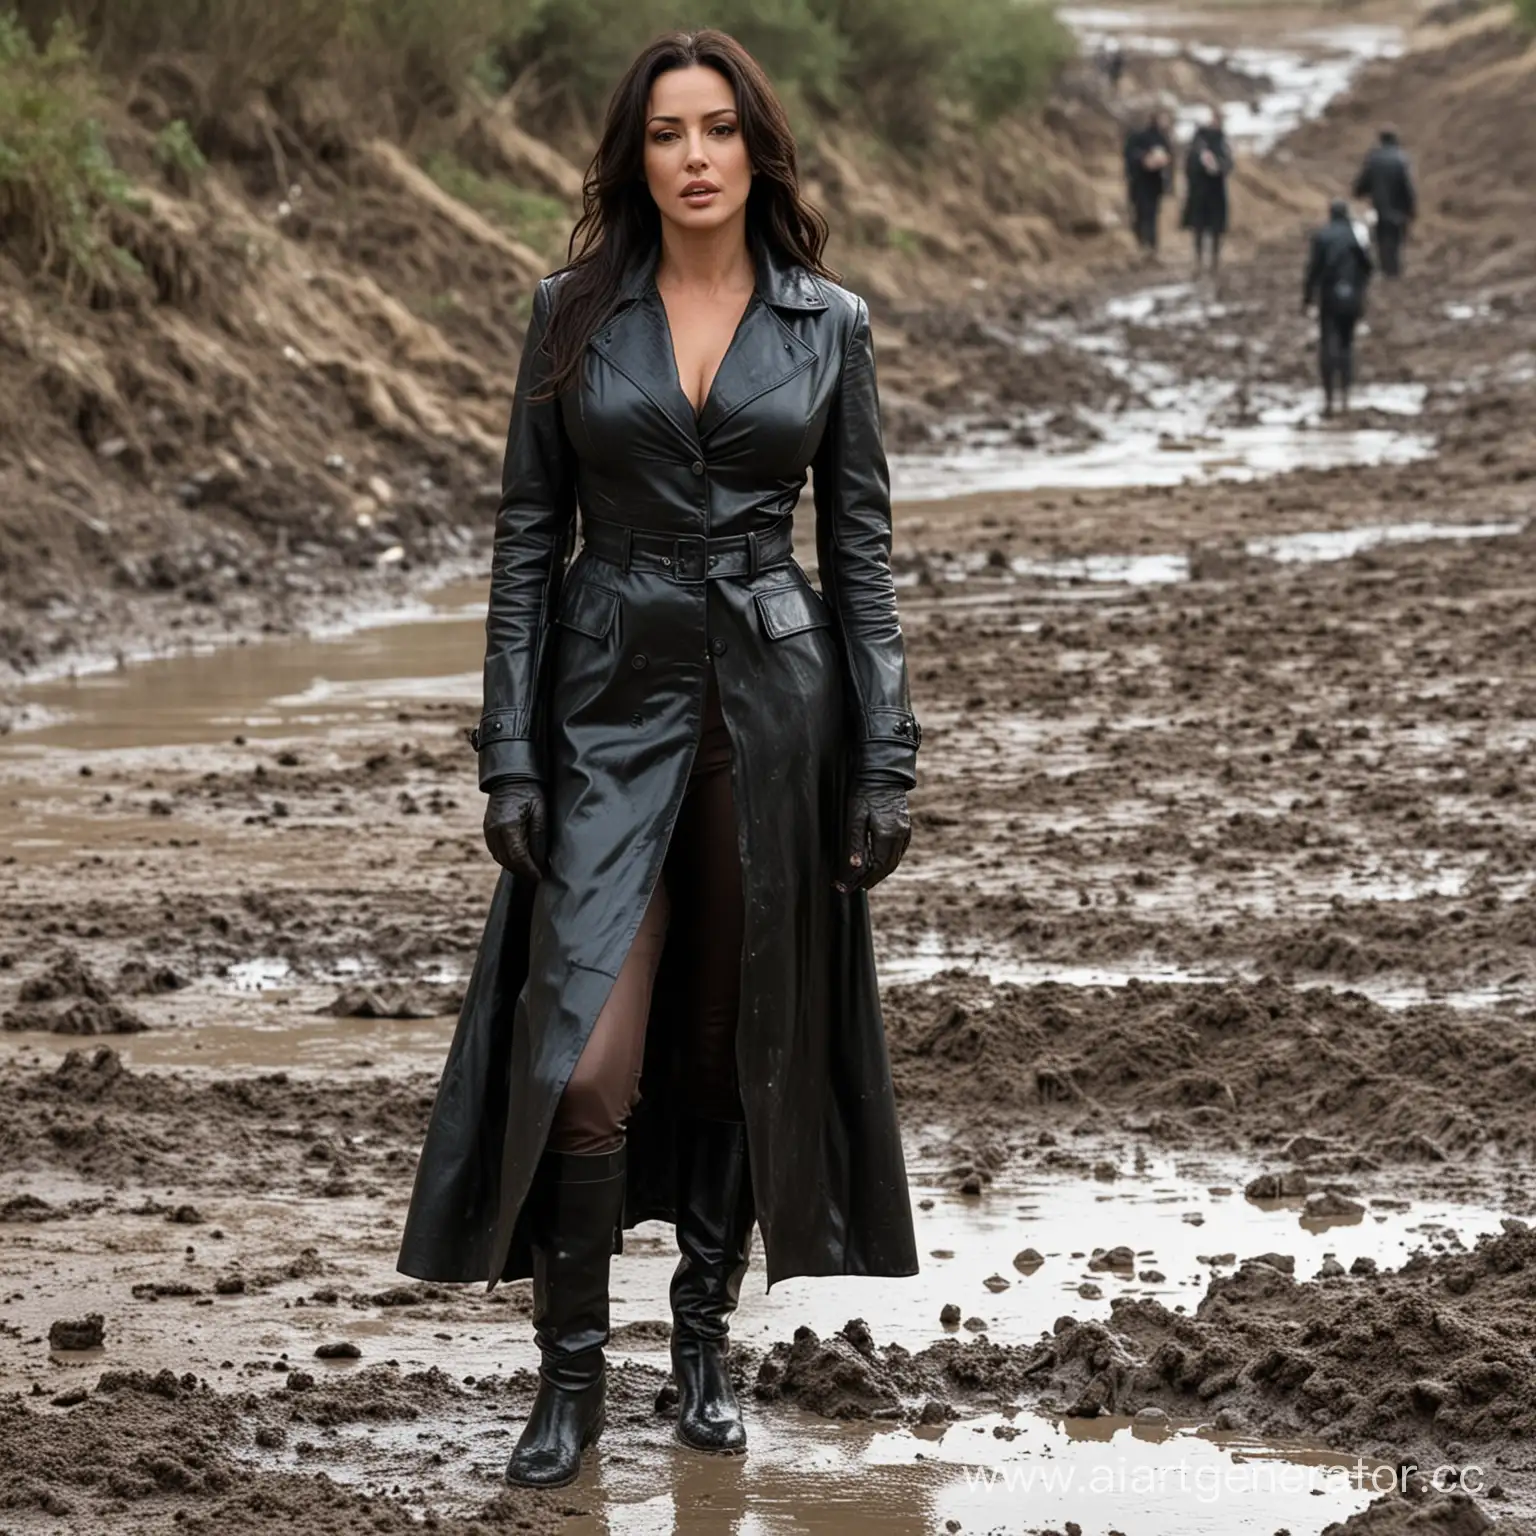 Monica-Bellucci-in-Dirty-Leather-Coat-Standing-in-Mud-Pit